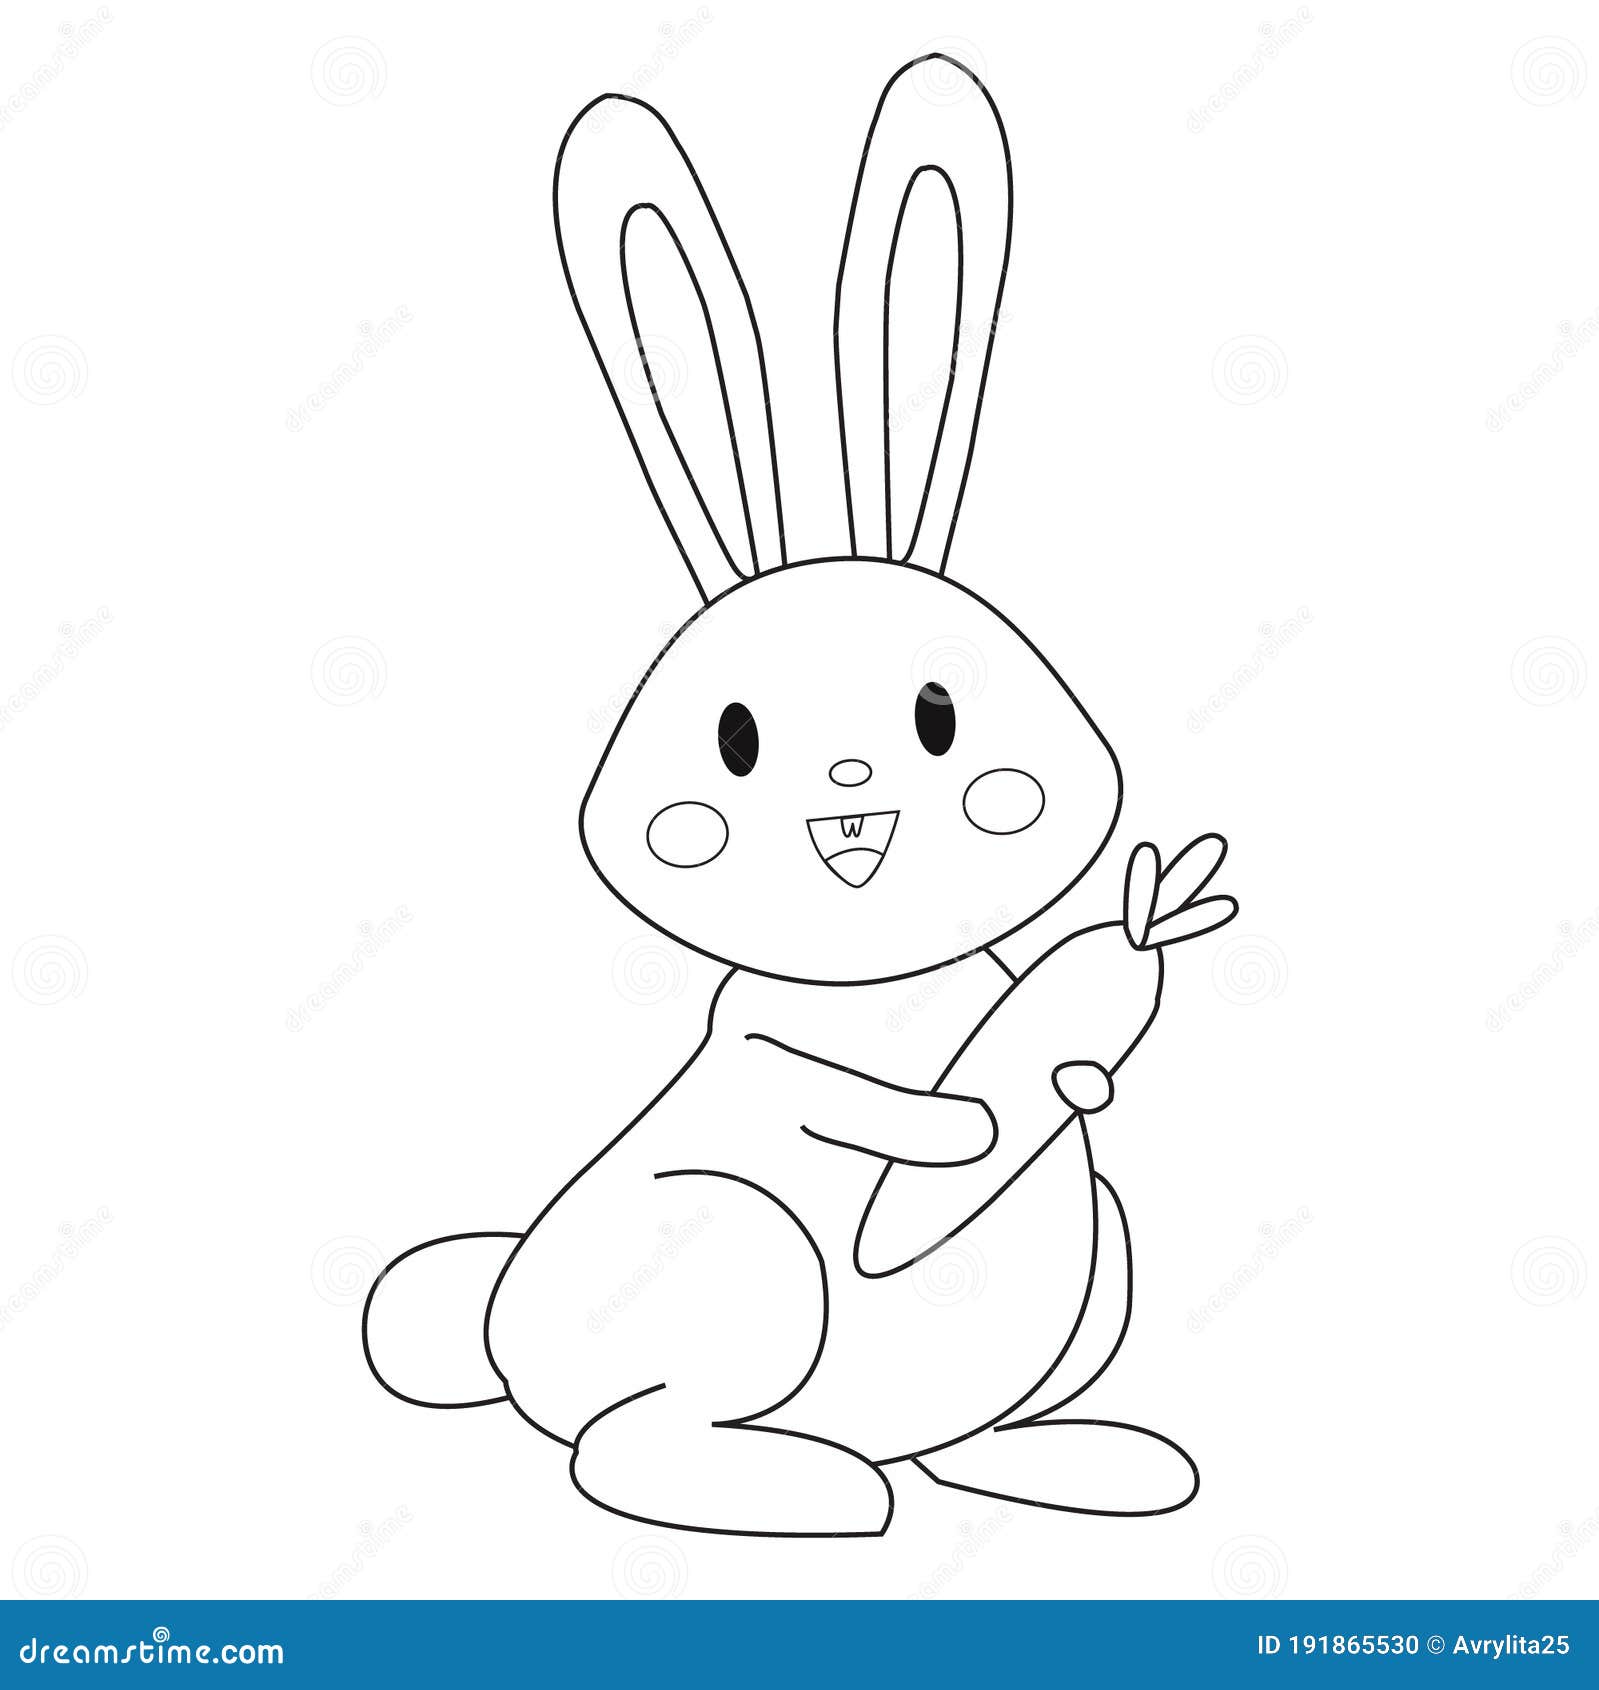 Rabbit Bunny Cartoon Outline Coloring Book for Kid Illustration Vector ...